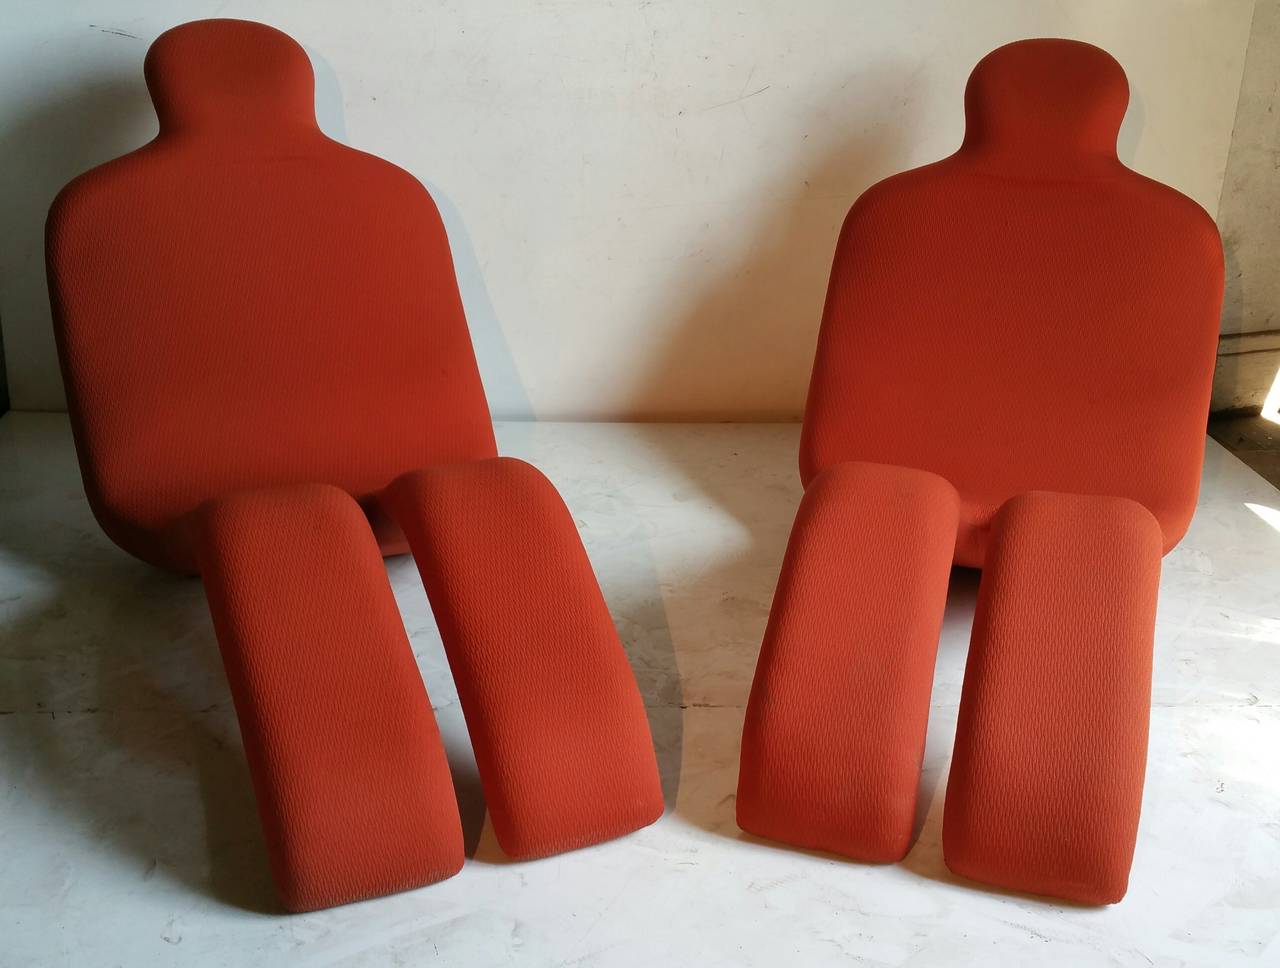 Matching Pair of Original Olivier Mourgue Bouloum Chaise Longues 1